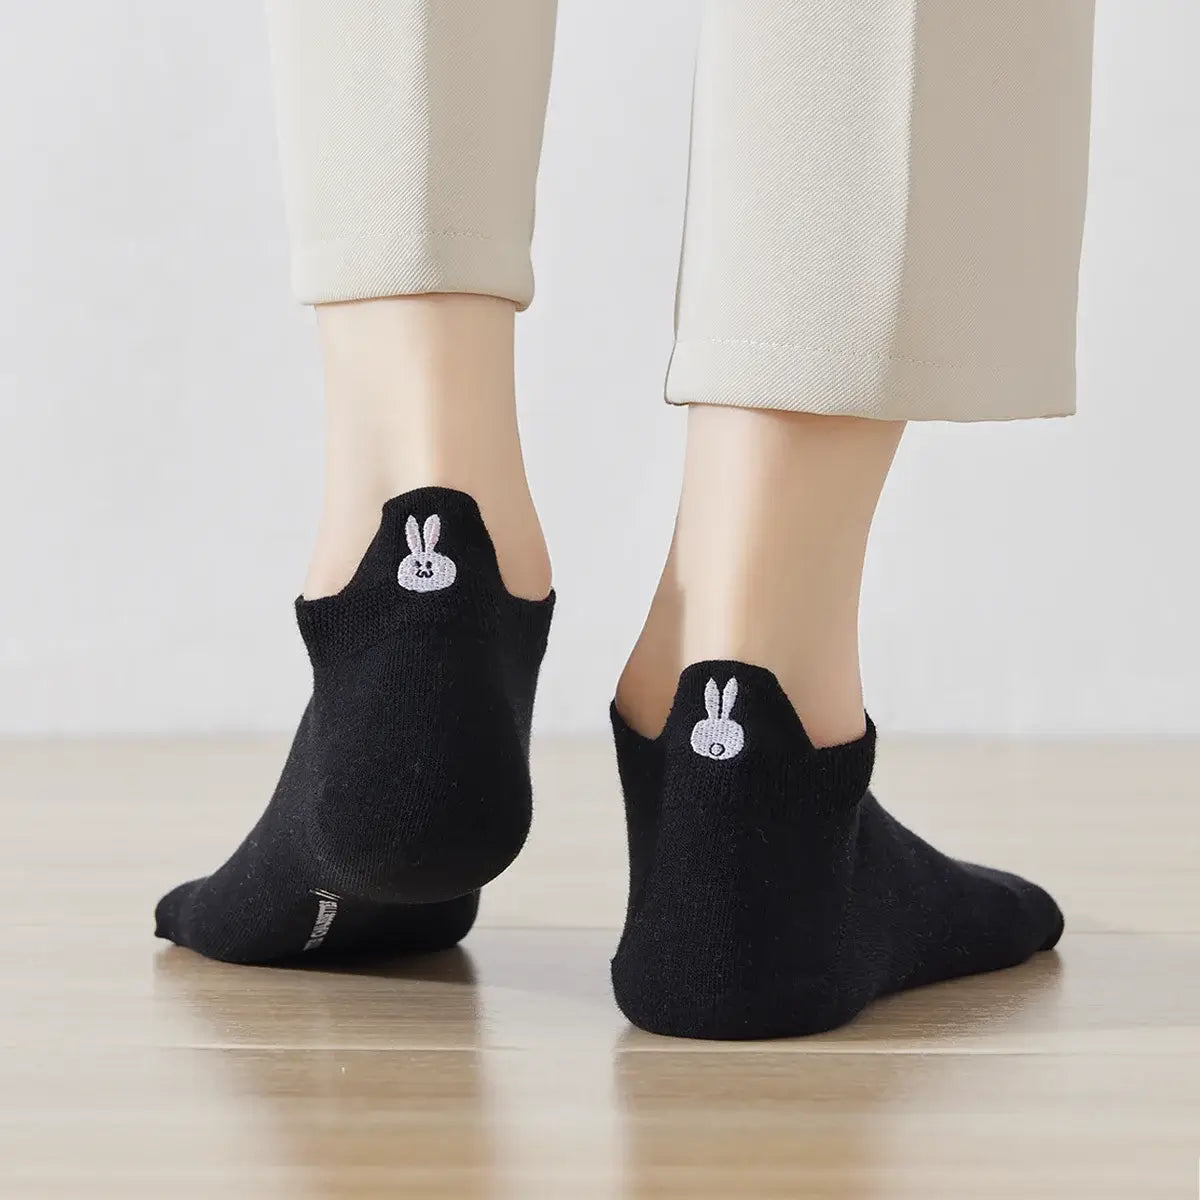 Chaussons Chaussettes Femme Lapin